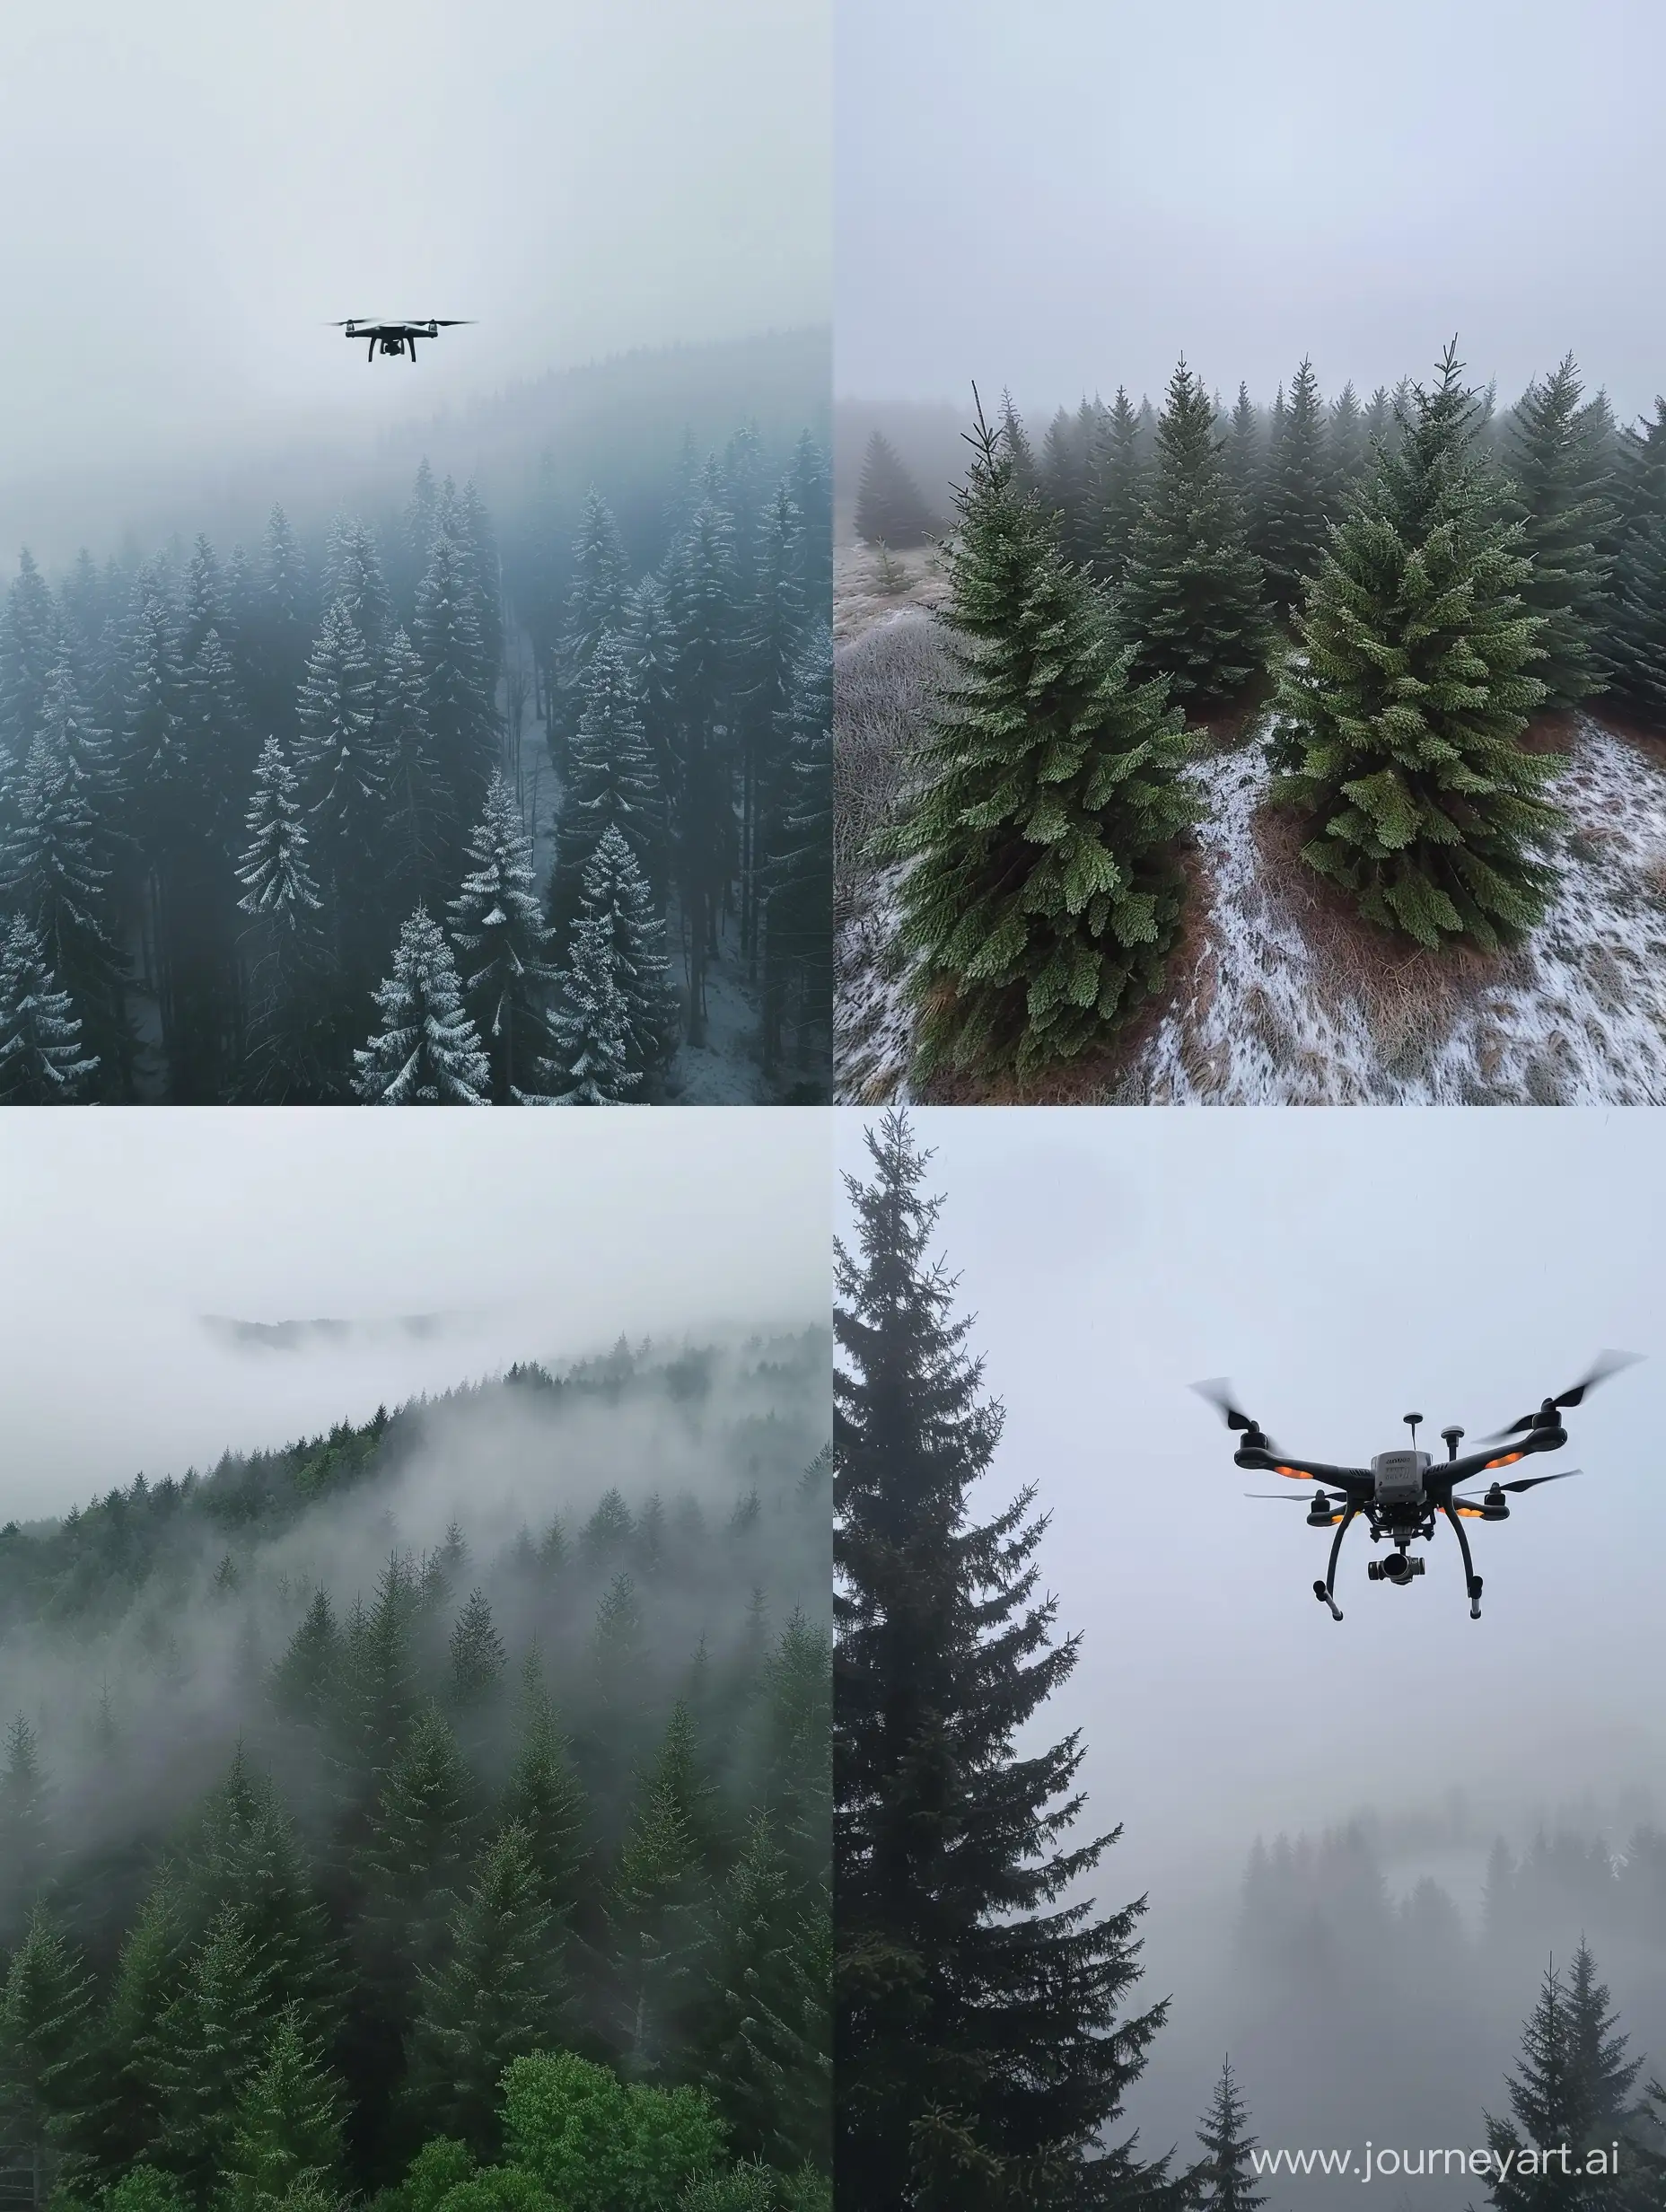 Misty-Pine-Trees-Aerial-View-Captured-by-Quadcopter-in-Overcast-Weather